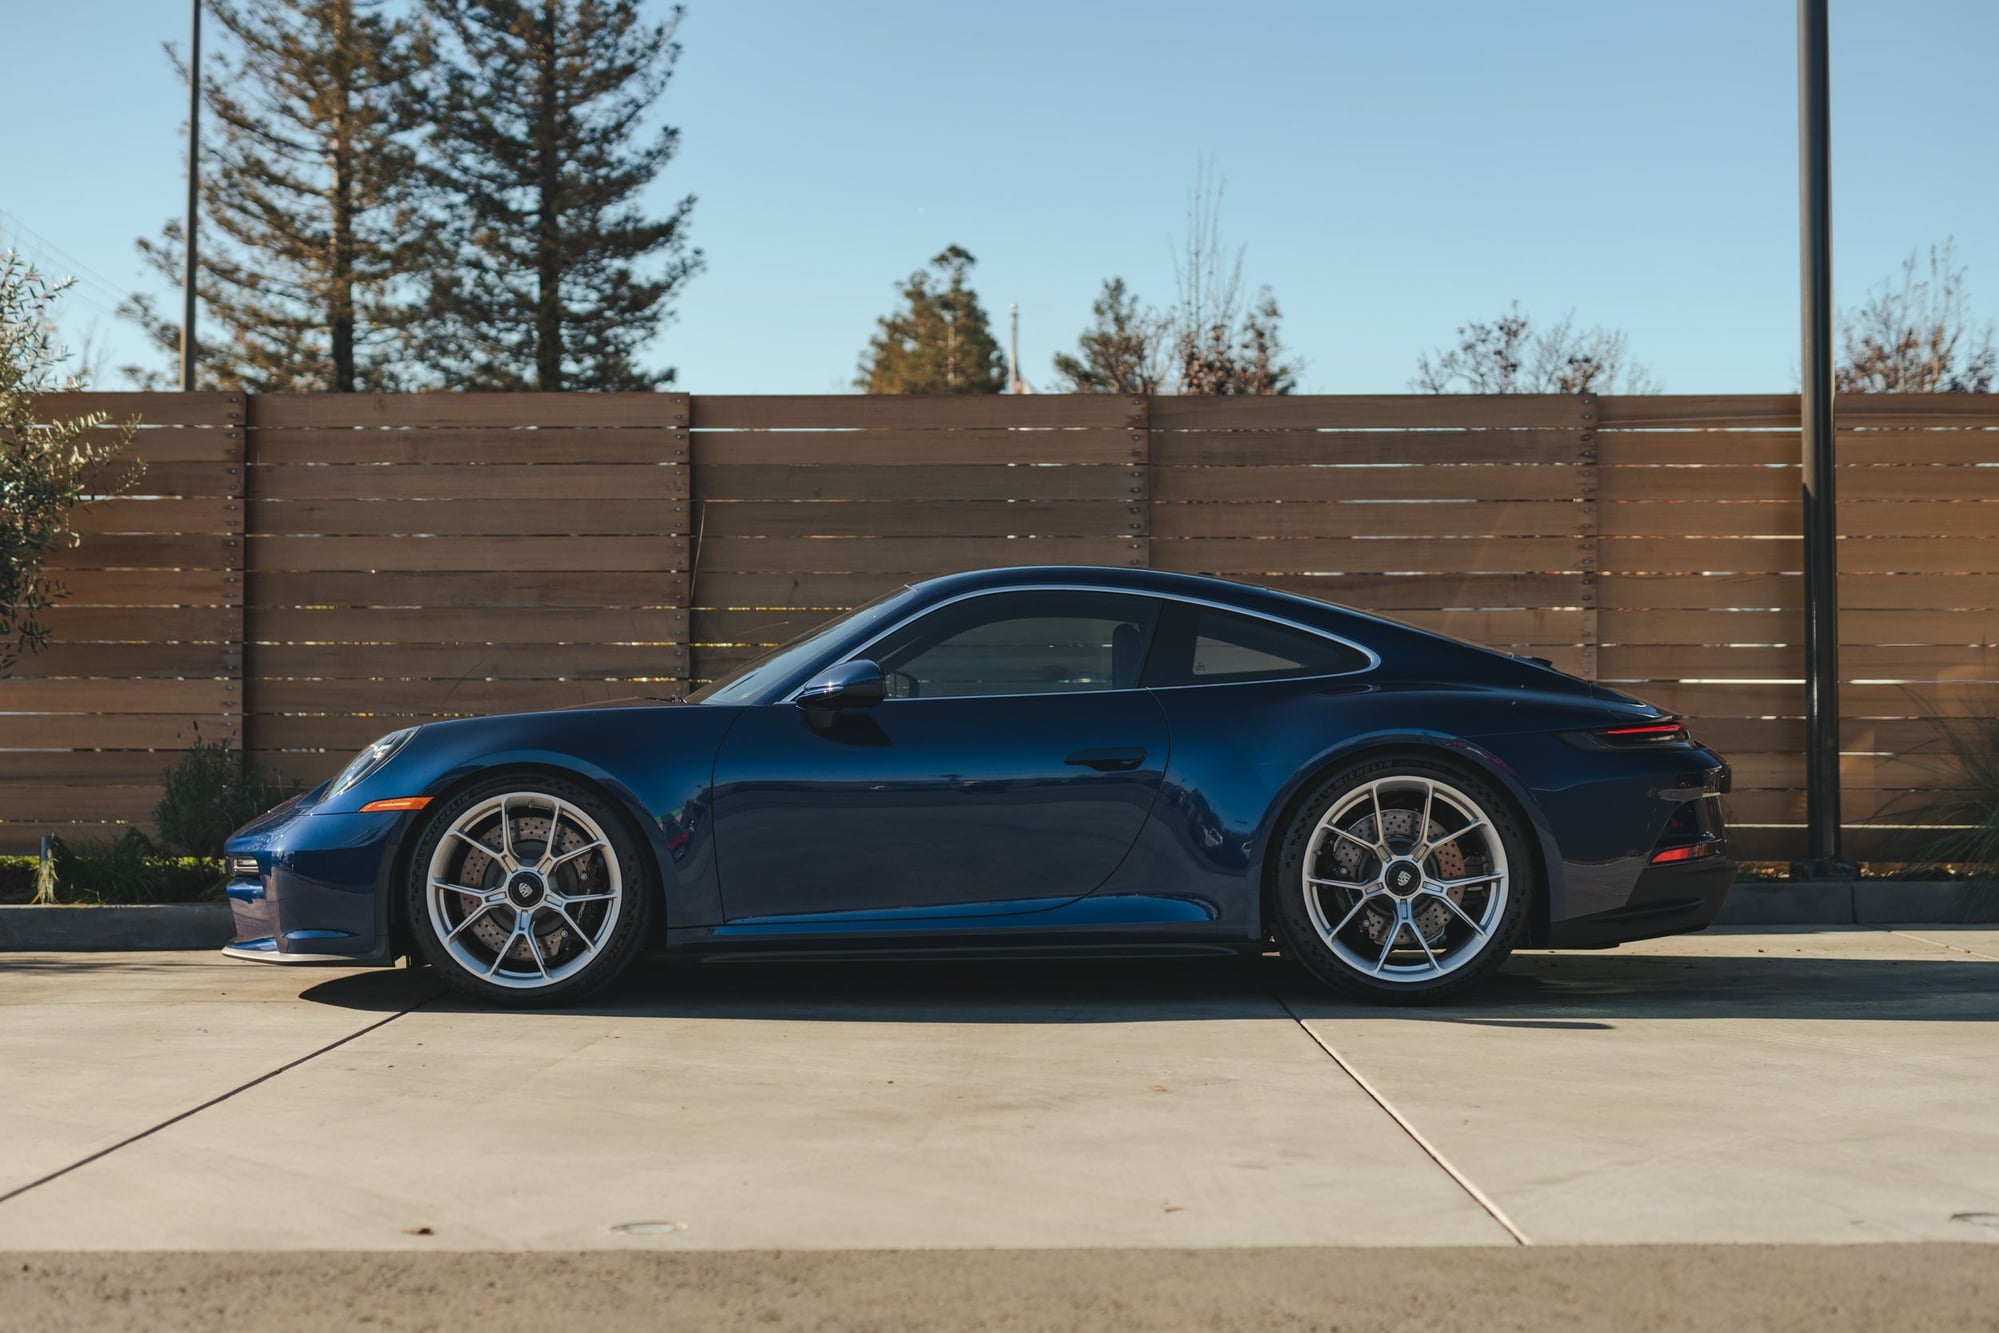 2022 Porsche 911 - 2022 992 GT3 Touring in Gentian Blue Metallic with 4,407 Miles. - Used - VIN WP0AC2A90NS270443 - 4,407 Miles - 6 cyl - 2WD - Automatic - Coupe - Blue - San Carlos, CA 94070, United States